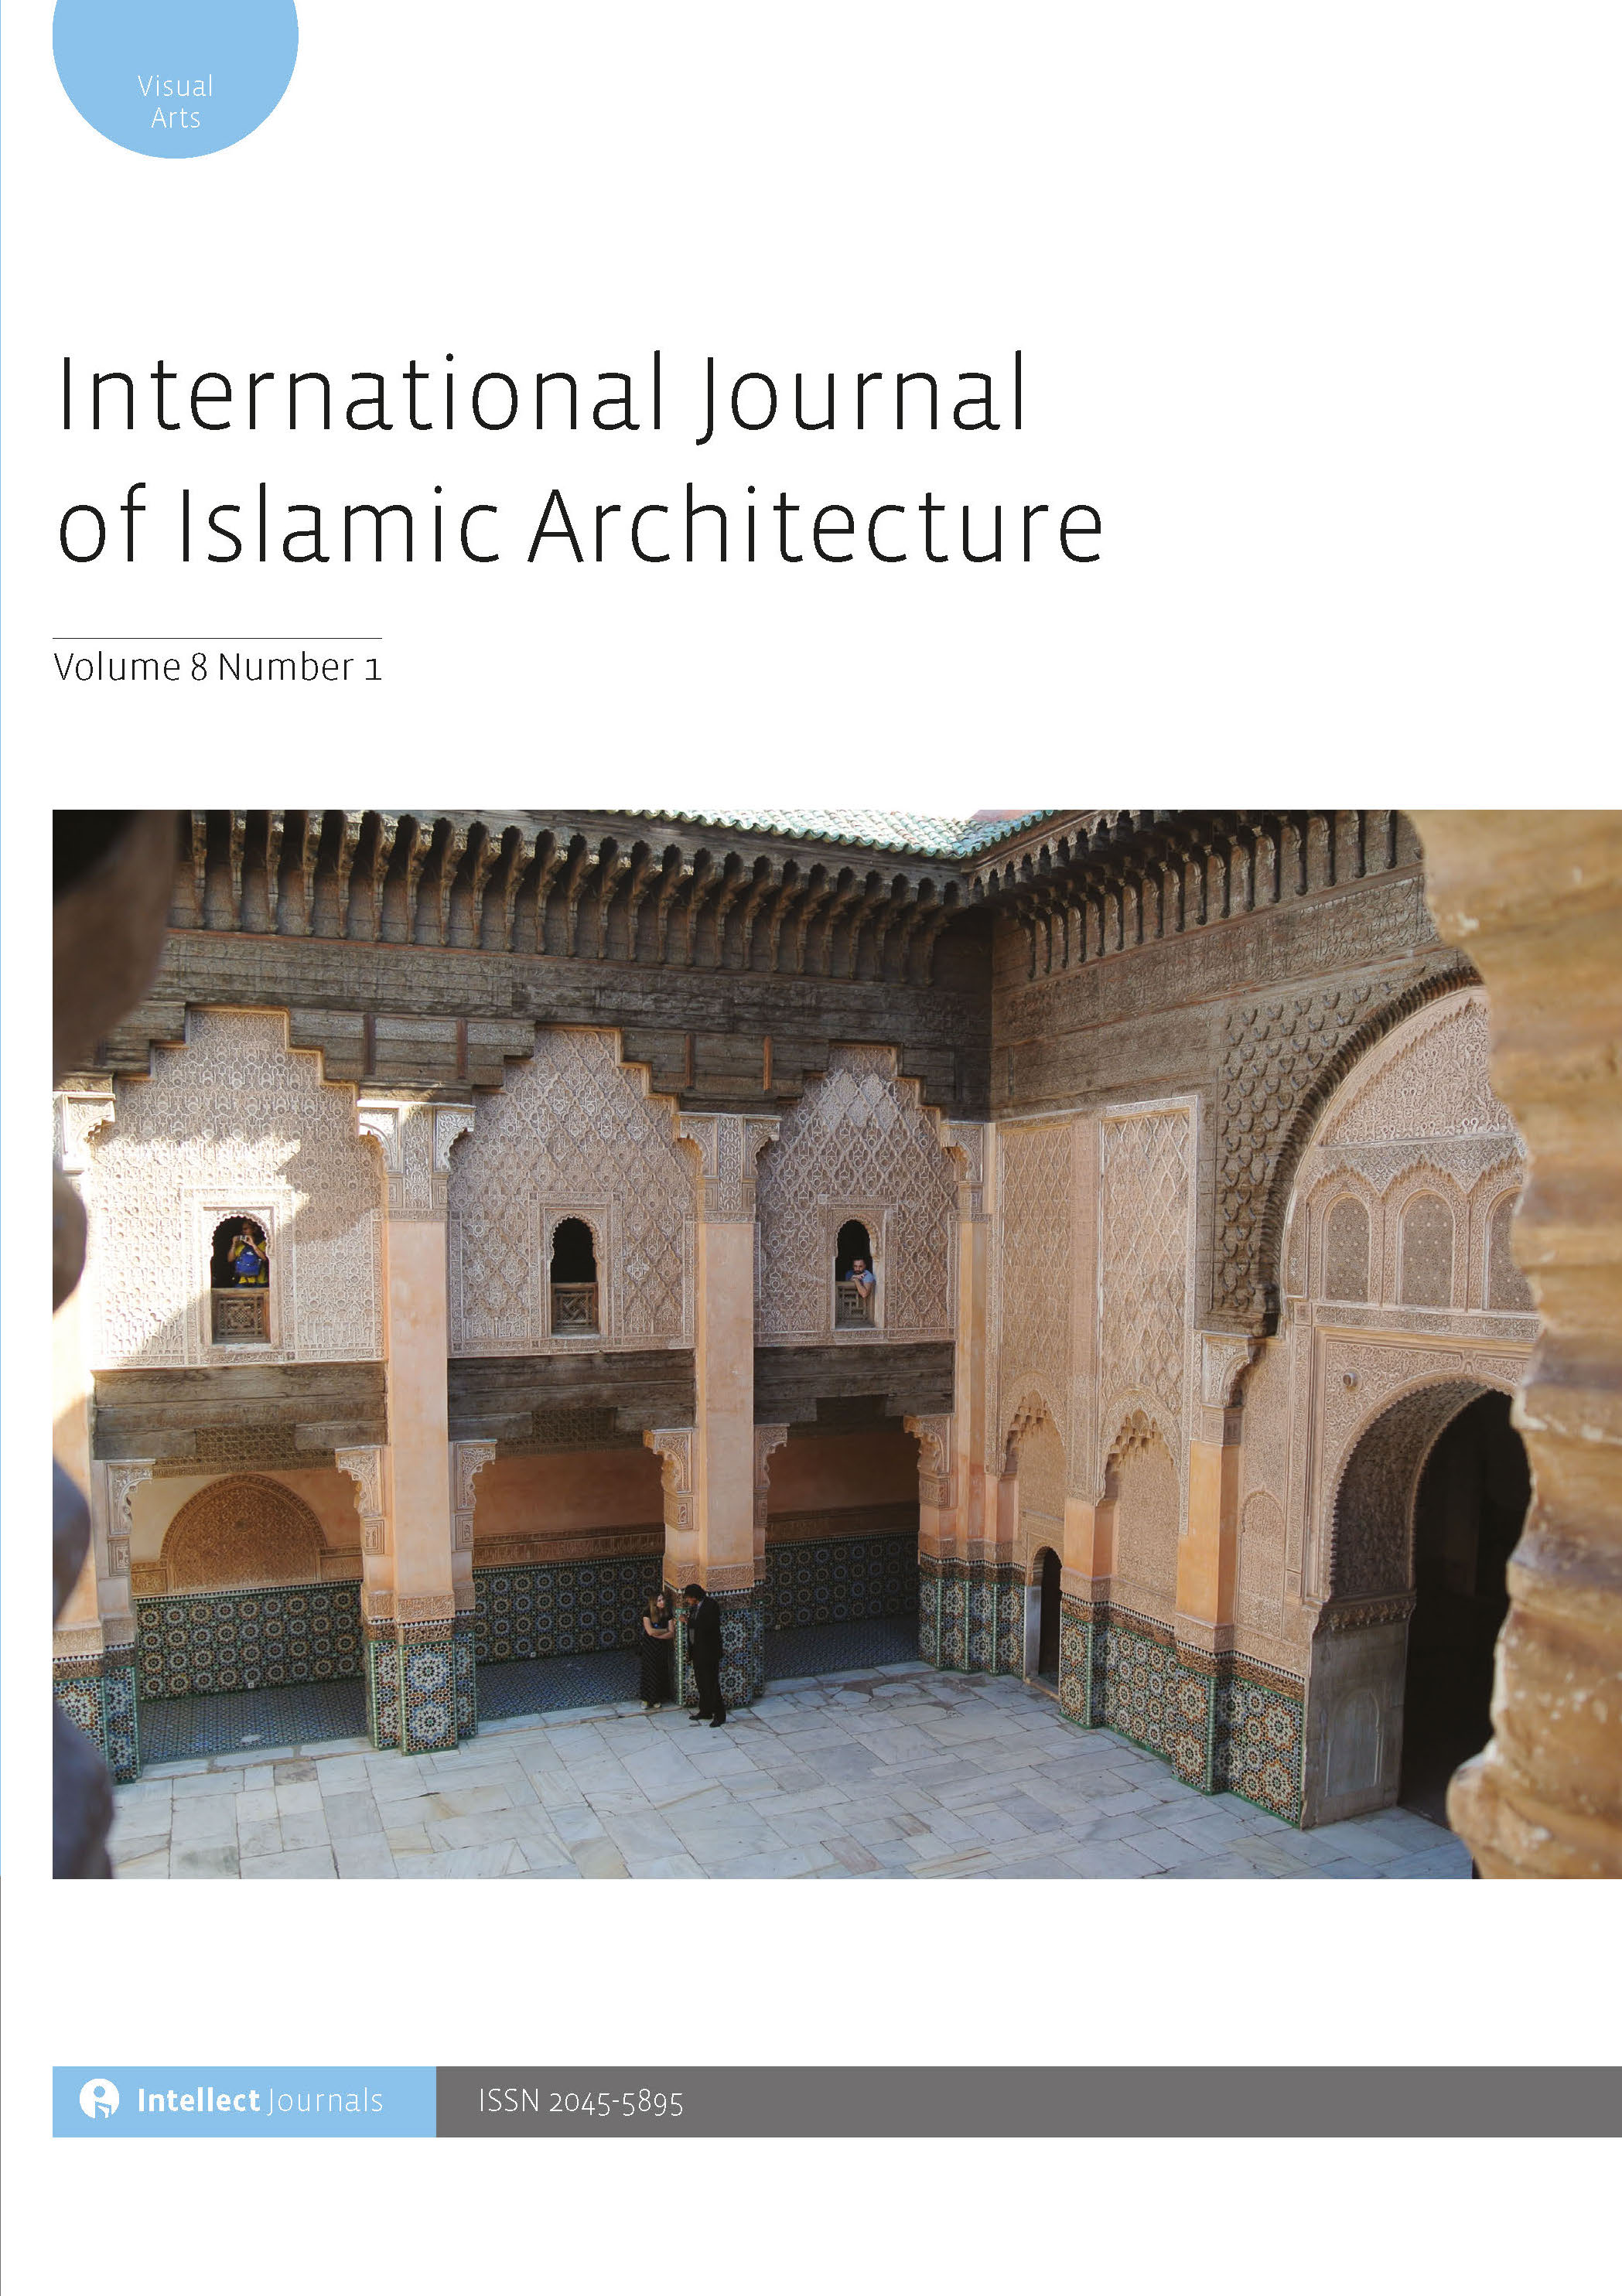 Ashraf Salama - This commentary is premised on more than three decades of research into architectural education and design pedagogy. It argues that architectural education in the Muslim world must be able to operate effectively within the global condition. It contends that the body of knowledge on architectural education can be enriched and its scope can be expanded when both historical and contemporary imperatives are clearly contextualized. The text raises important questions for future discussions on this theme. Notwithstanding, the article discusses some of the negative idiosyncrasies that follow models inherited from the past and adopt techniques practiced by their Western counterparts. It proposes a framework for incorporating Appreciative Inquiry (AI) as a paradigm for critical consciousness and the way in which key techniques can be utilized. The thrust is that these techniques offer students learning opportunities that invigorate their capabilities to shift from passive listeners to active learners and from knowledge consumers to knowledge producers.<div><br></div><div>Keywords:&nbsp;Appreciative Inquiry (AI); Inquiry-Based Learning (IBL); active learning; architectural education discourse; experiential learning; teaching idiosyncrasies</div>